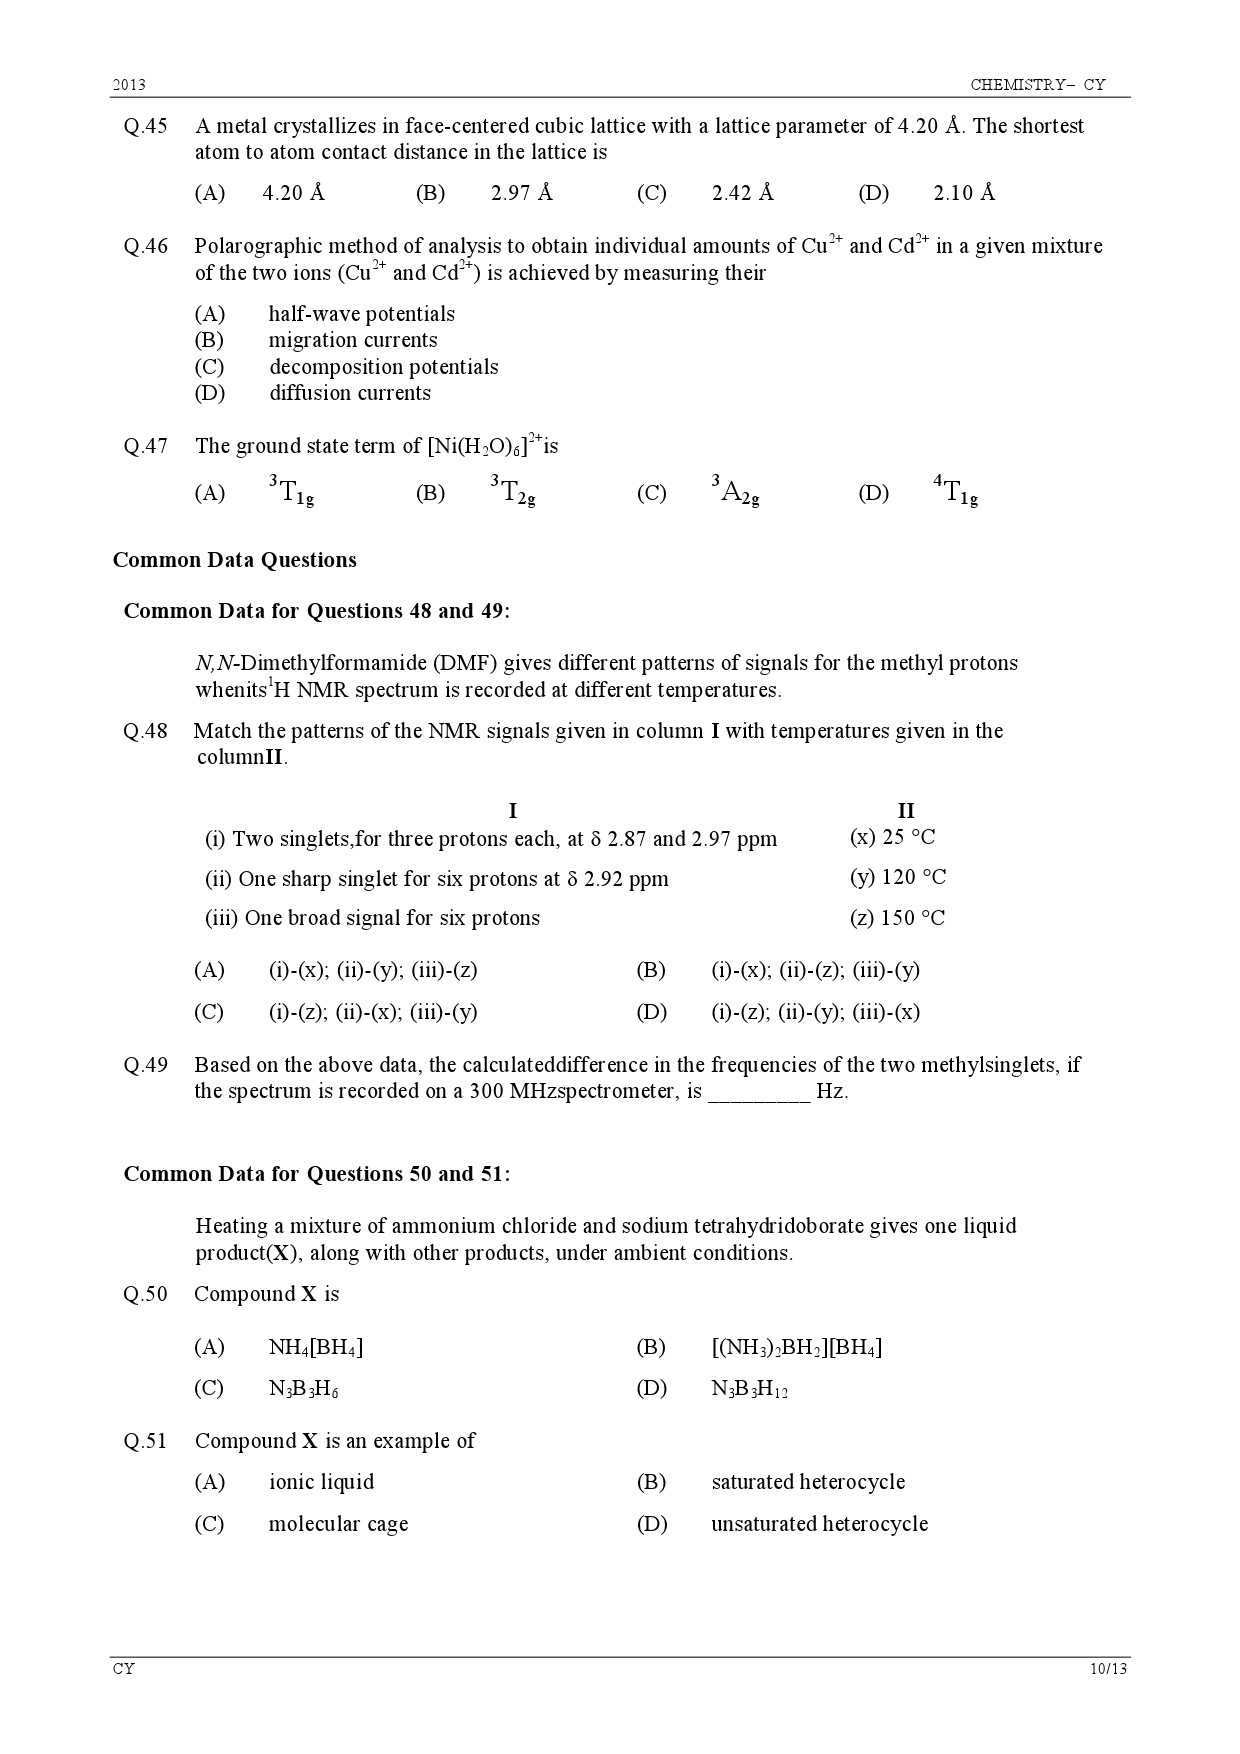 GATE Exam Question Paper 2013 Chemistry 10